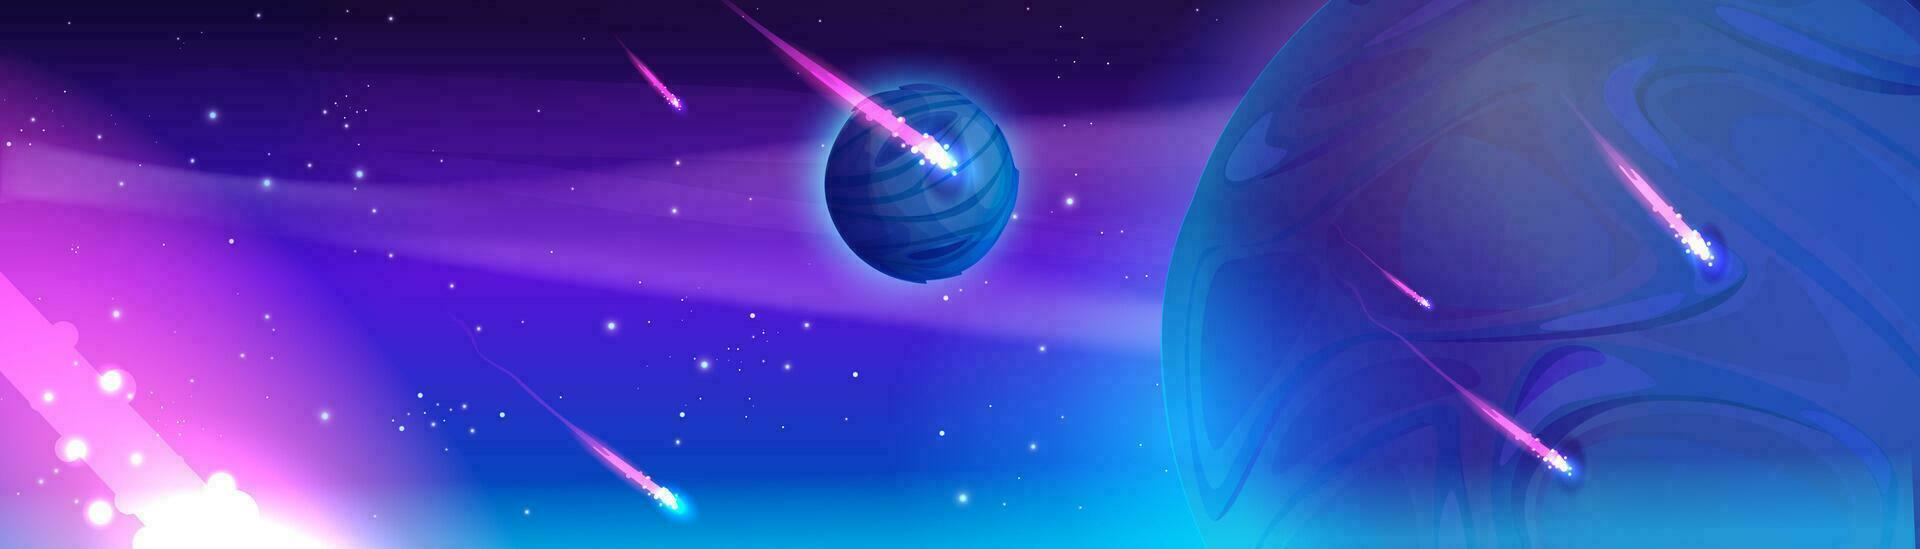 Fantasy space with planets and shooting stars vector